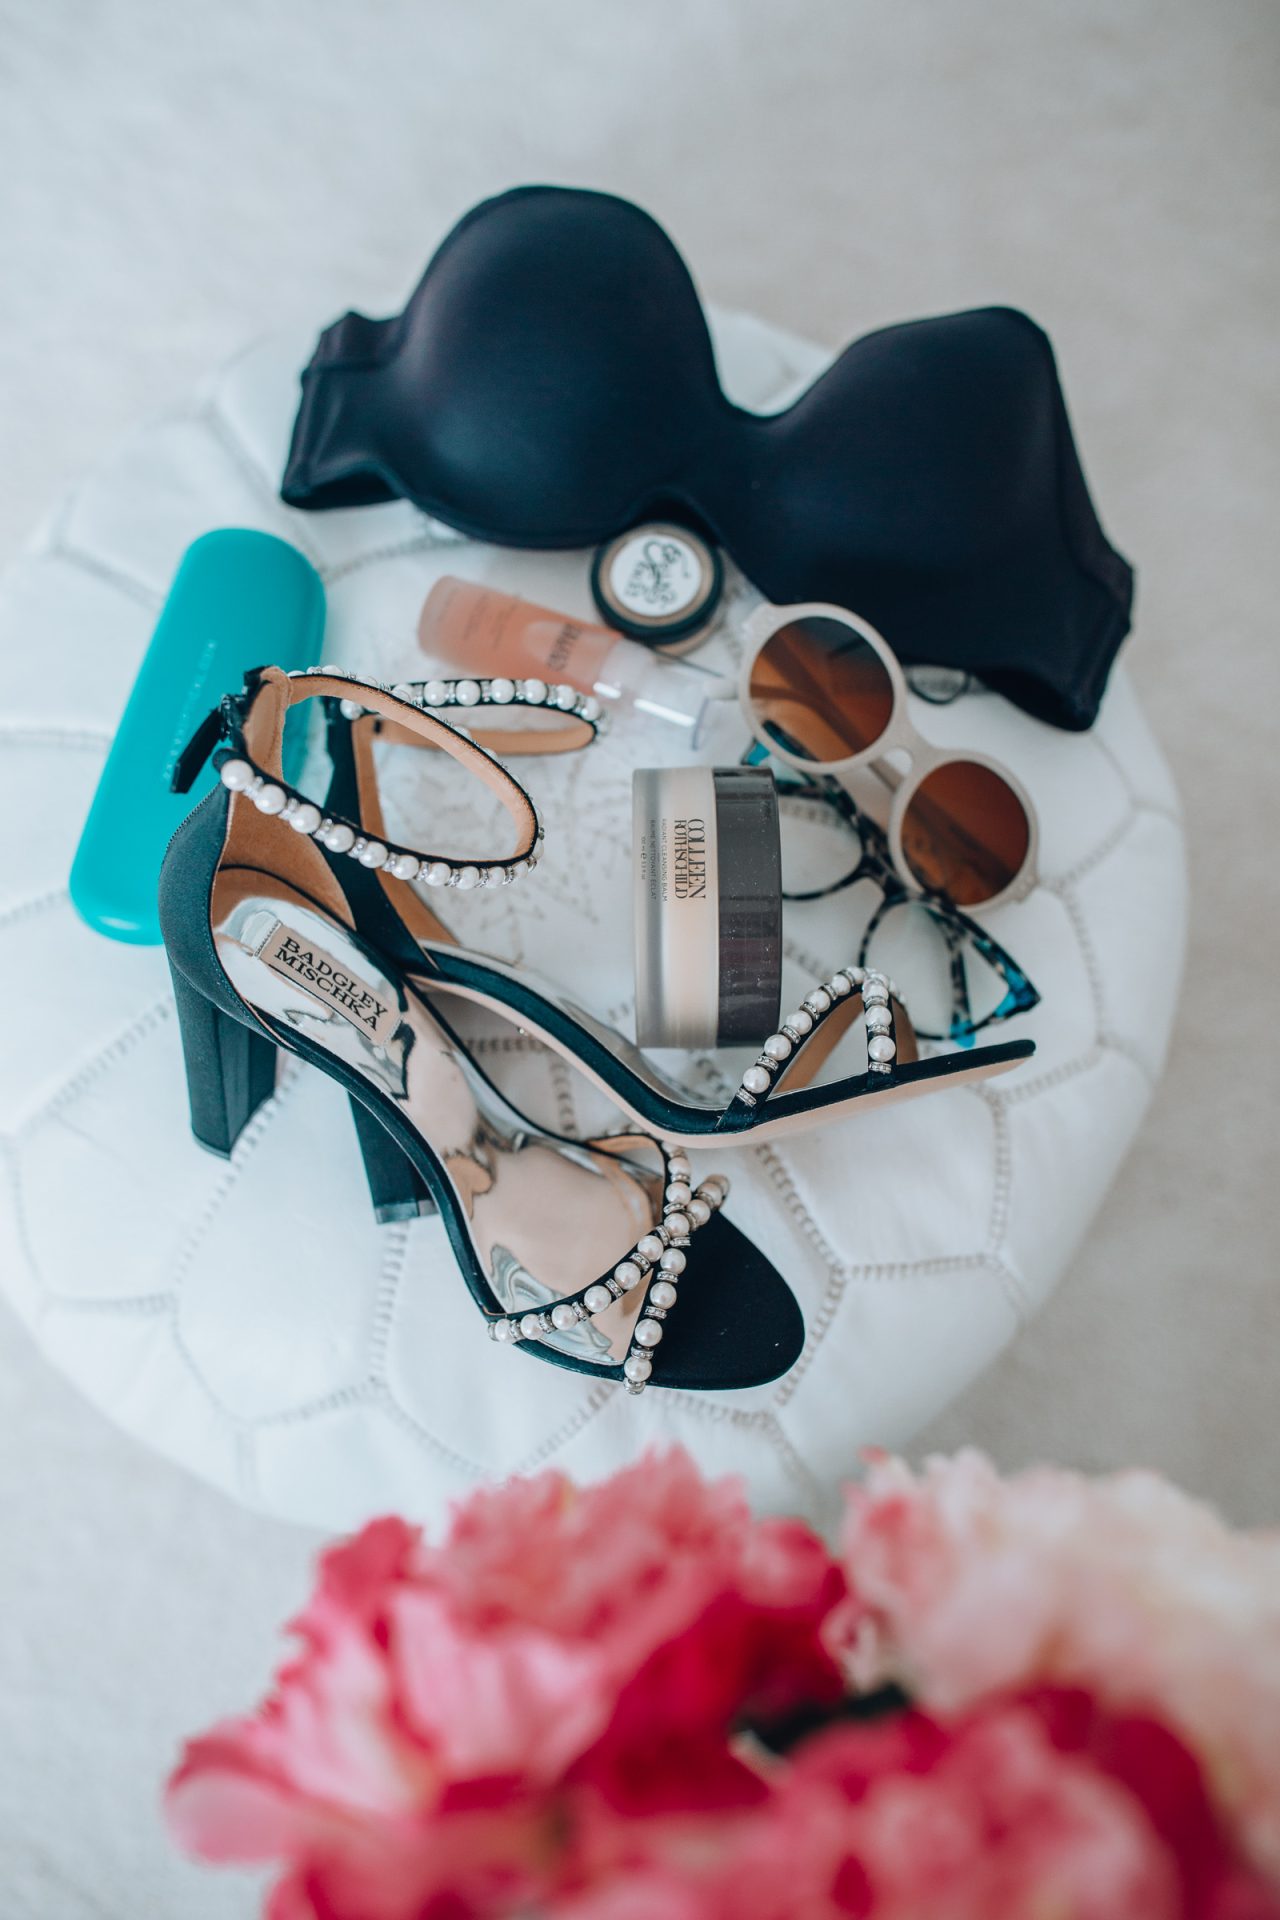 Chicago style blogger shares 6 spring items that shes currently loving, including: rothschild beauty, badgley mischka pearl shoes, vegan makeup & more!